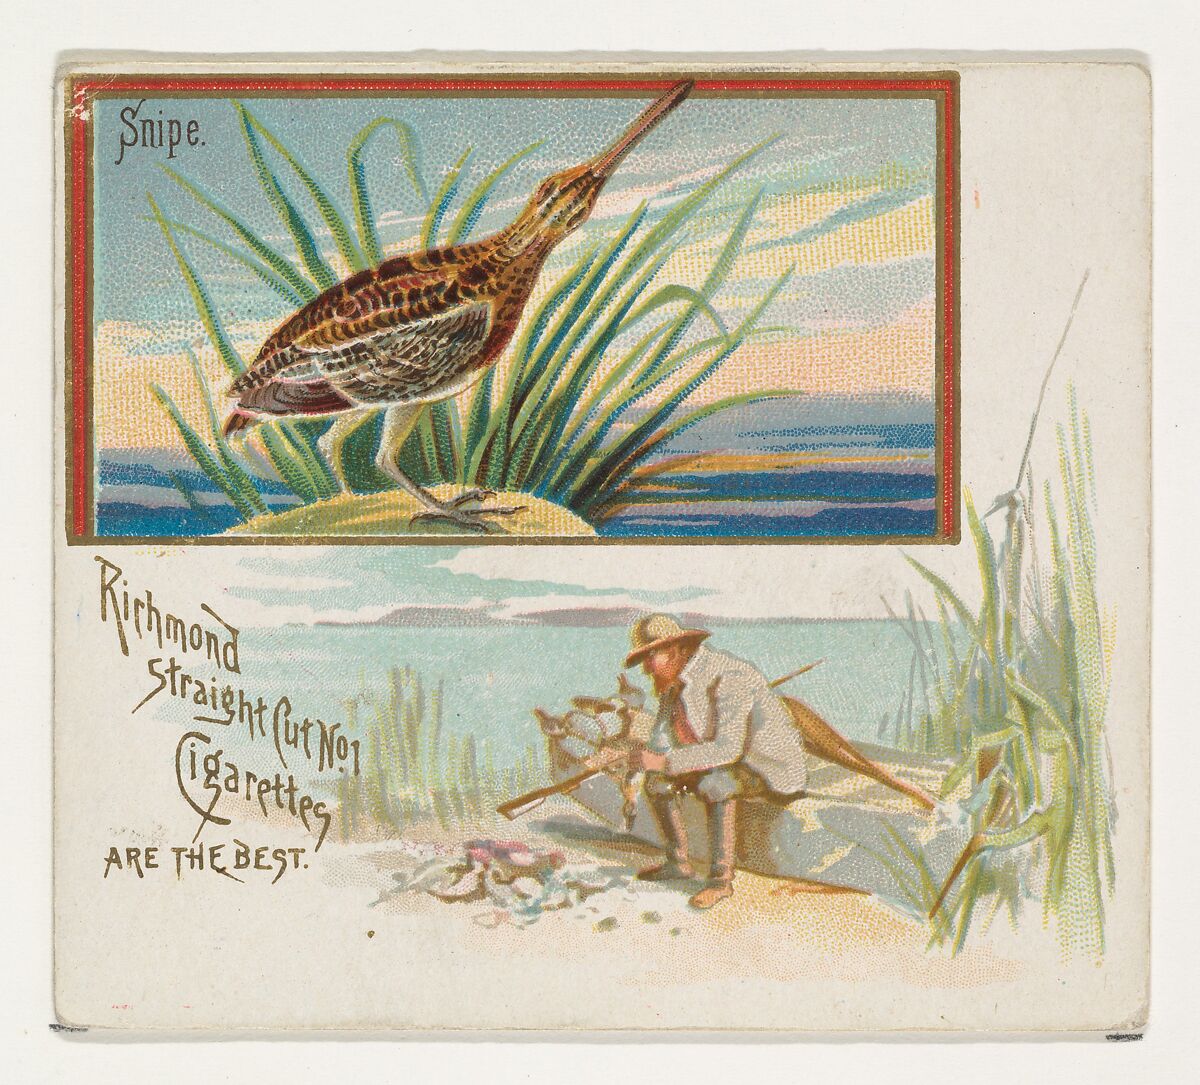 Snipe, from the Game Birds series (N40) for Allen & Ginter Cigarettes, Issued by Allen &amp; Ginter (American, Richmond, Virginia), Commercial color lithograph 